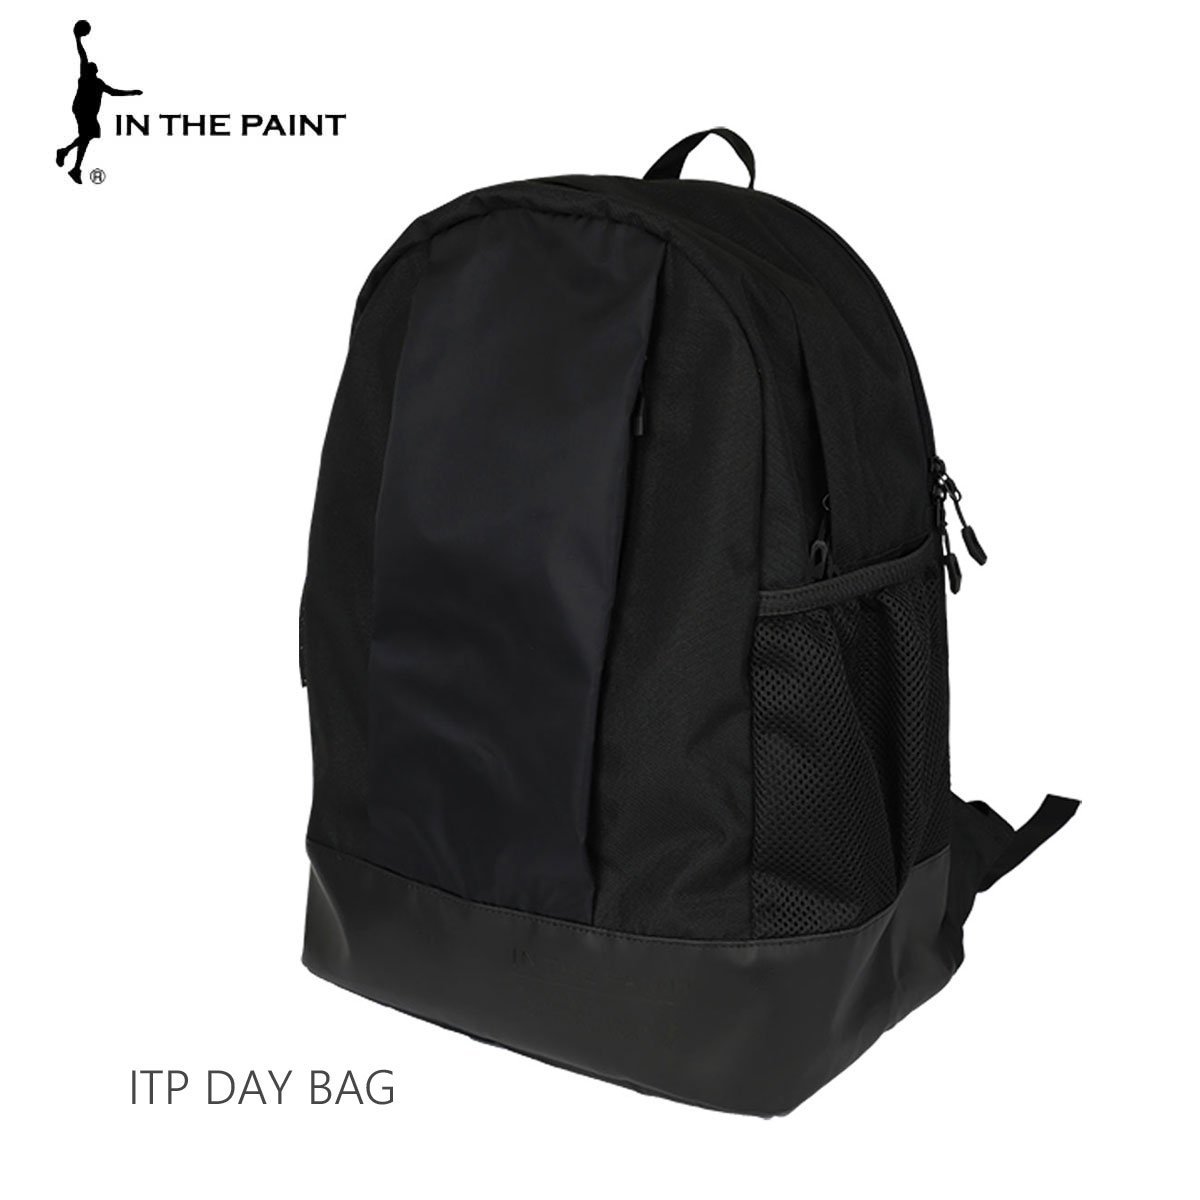 1506553-InThePaint/バスケ バッグ バックパック デイバッグ ITP DAY BAG/F